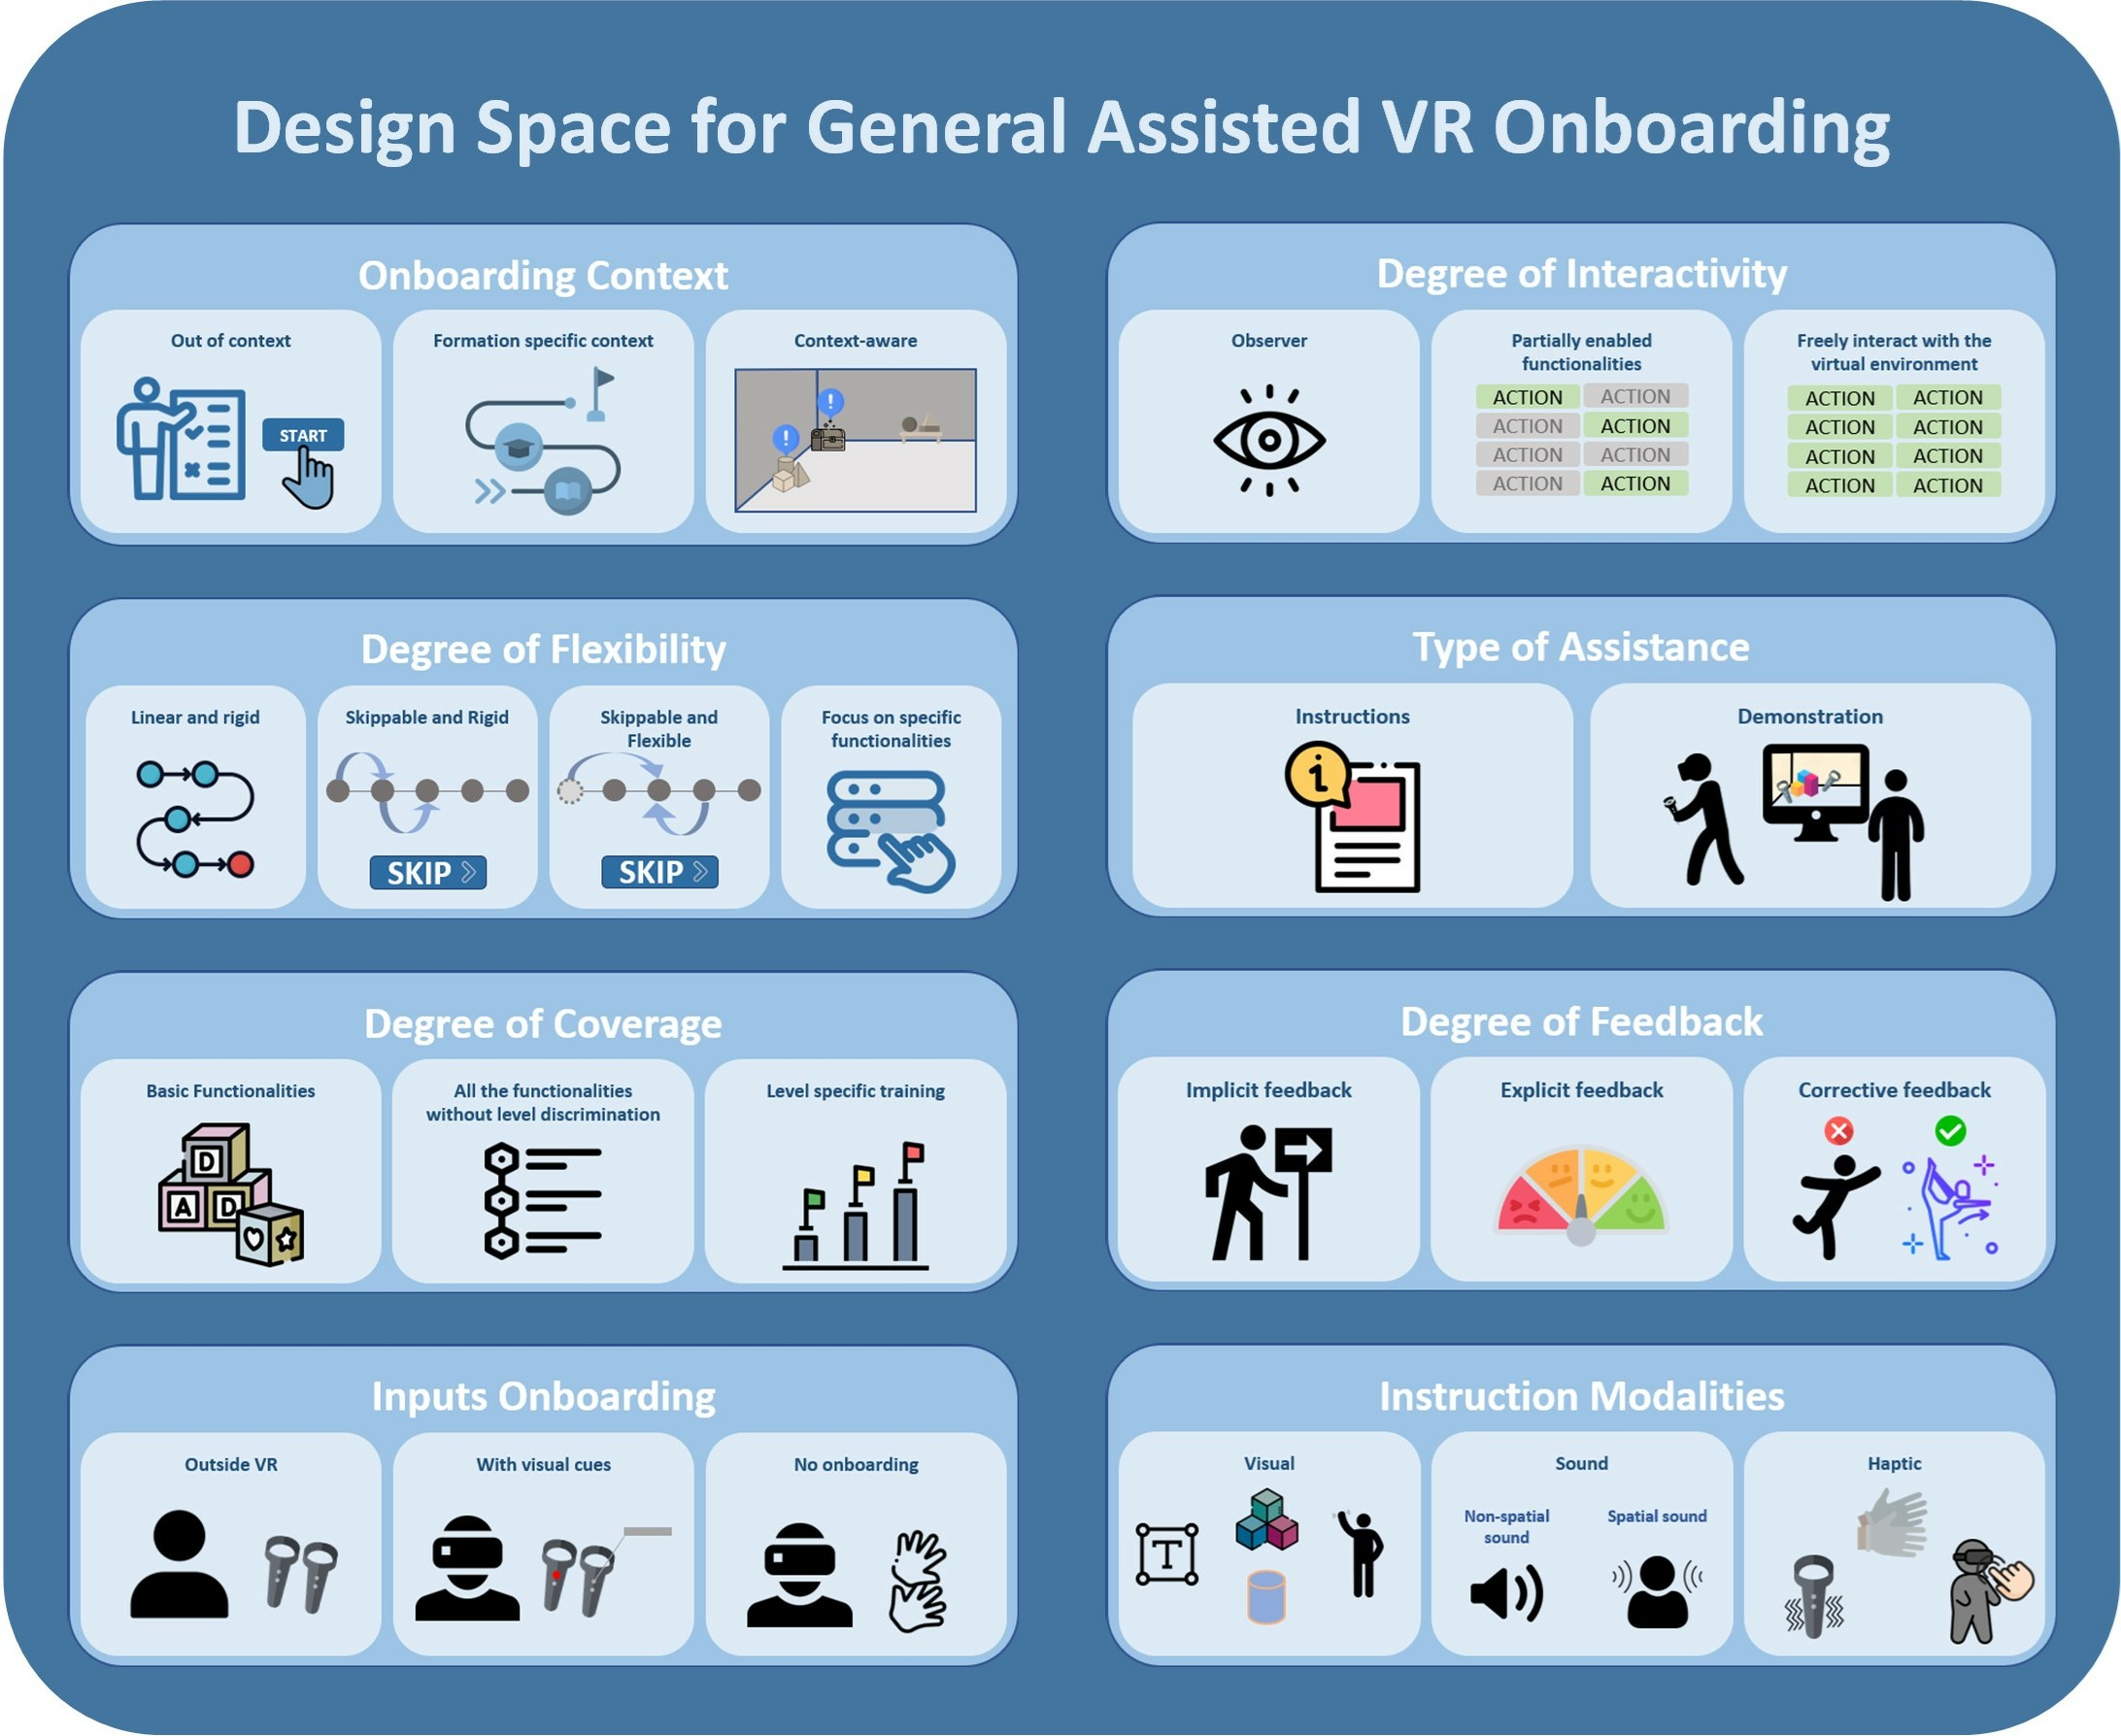 Visual representation of the design space for VR onboarding